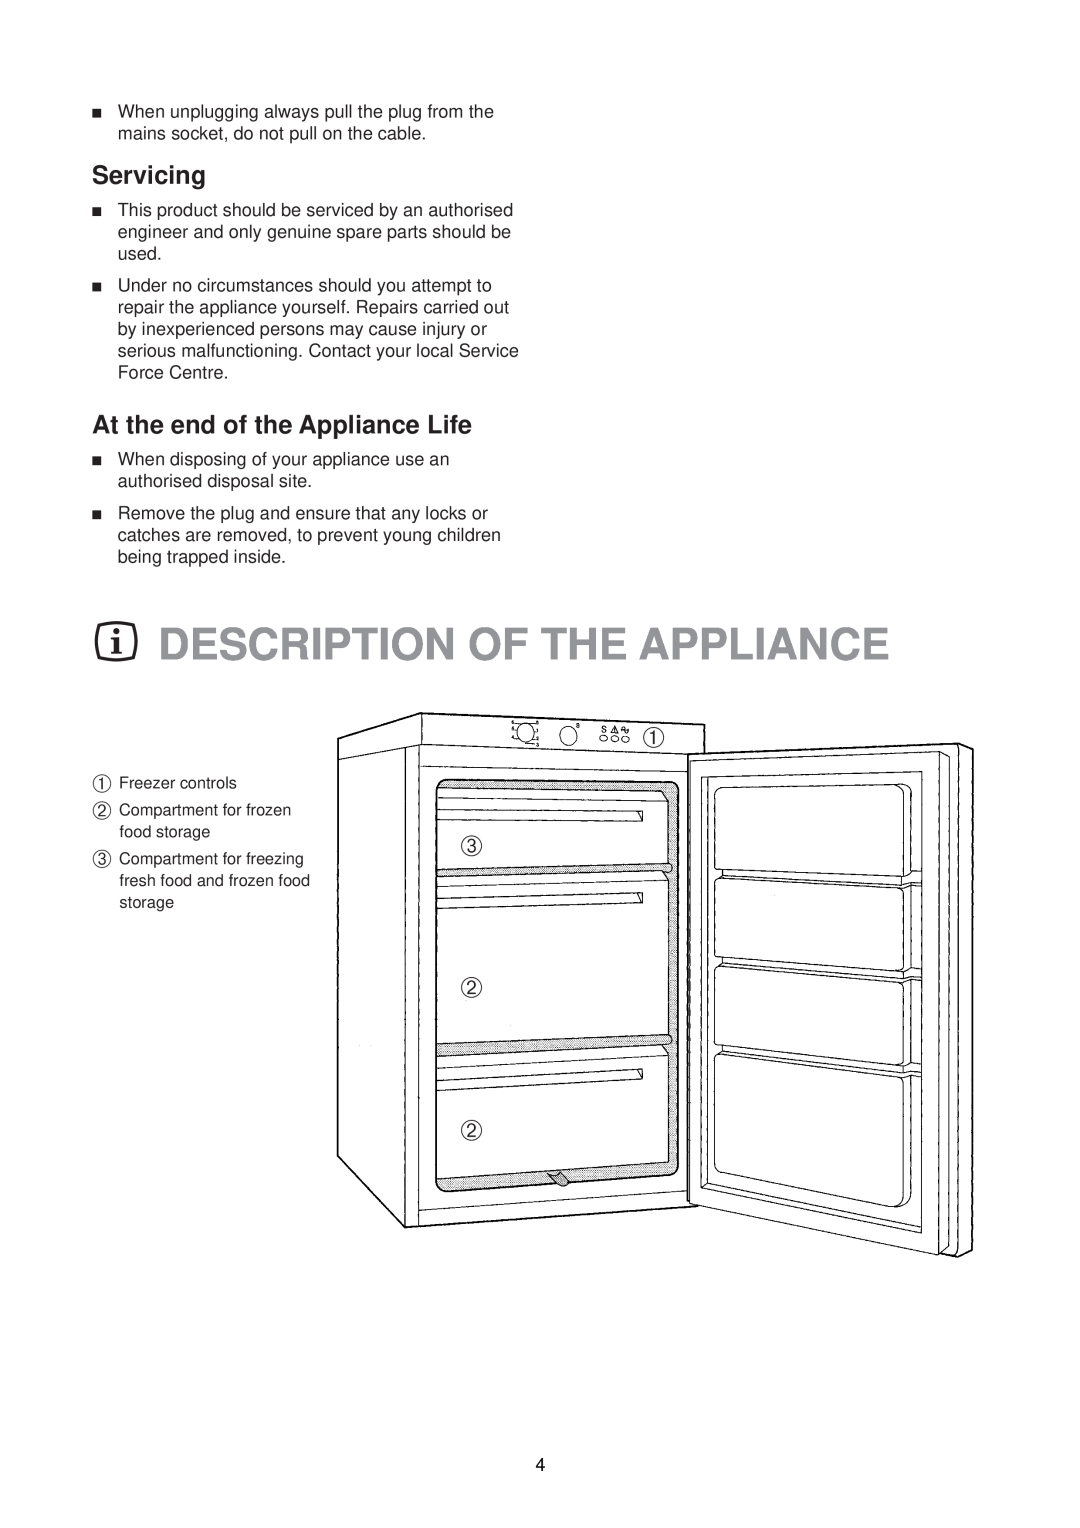 Zanussi CF 50 SI manual Description Of The Appliance, Servicing, At the end of the Appliance Life 